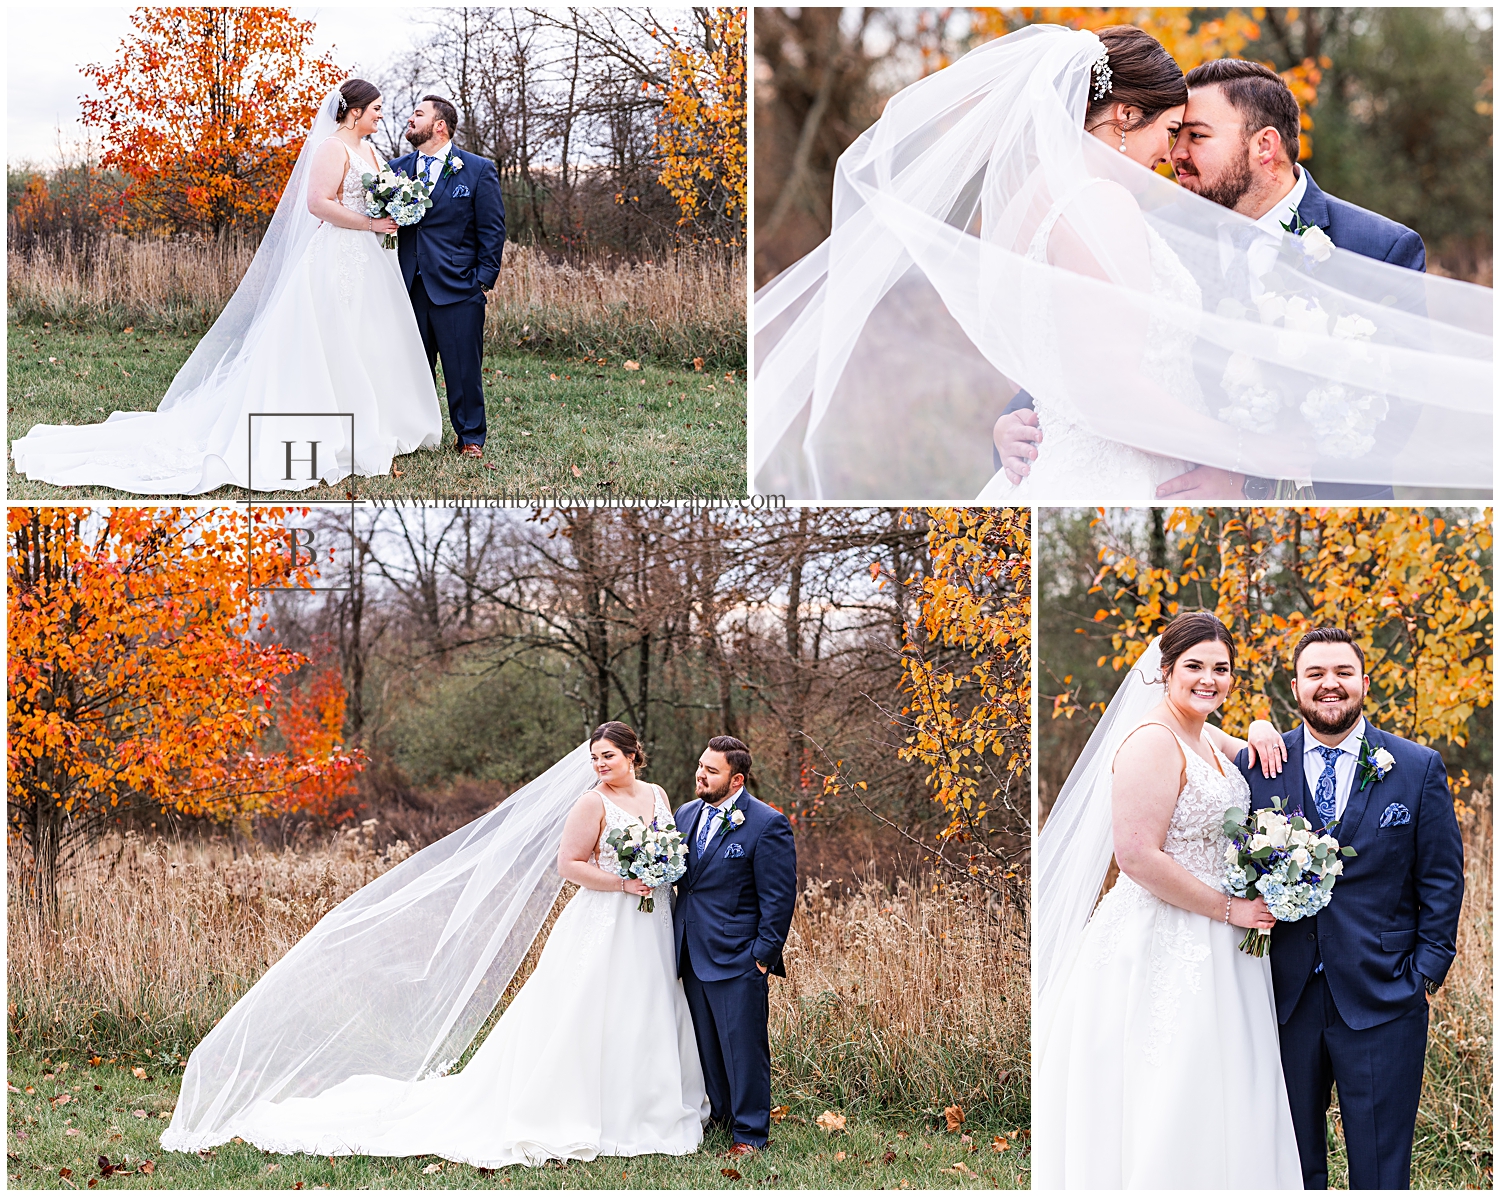 Bride and groom with navy details pose for fall wedding photos